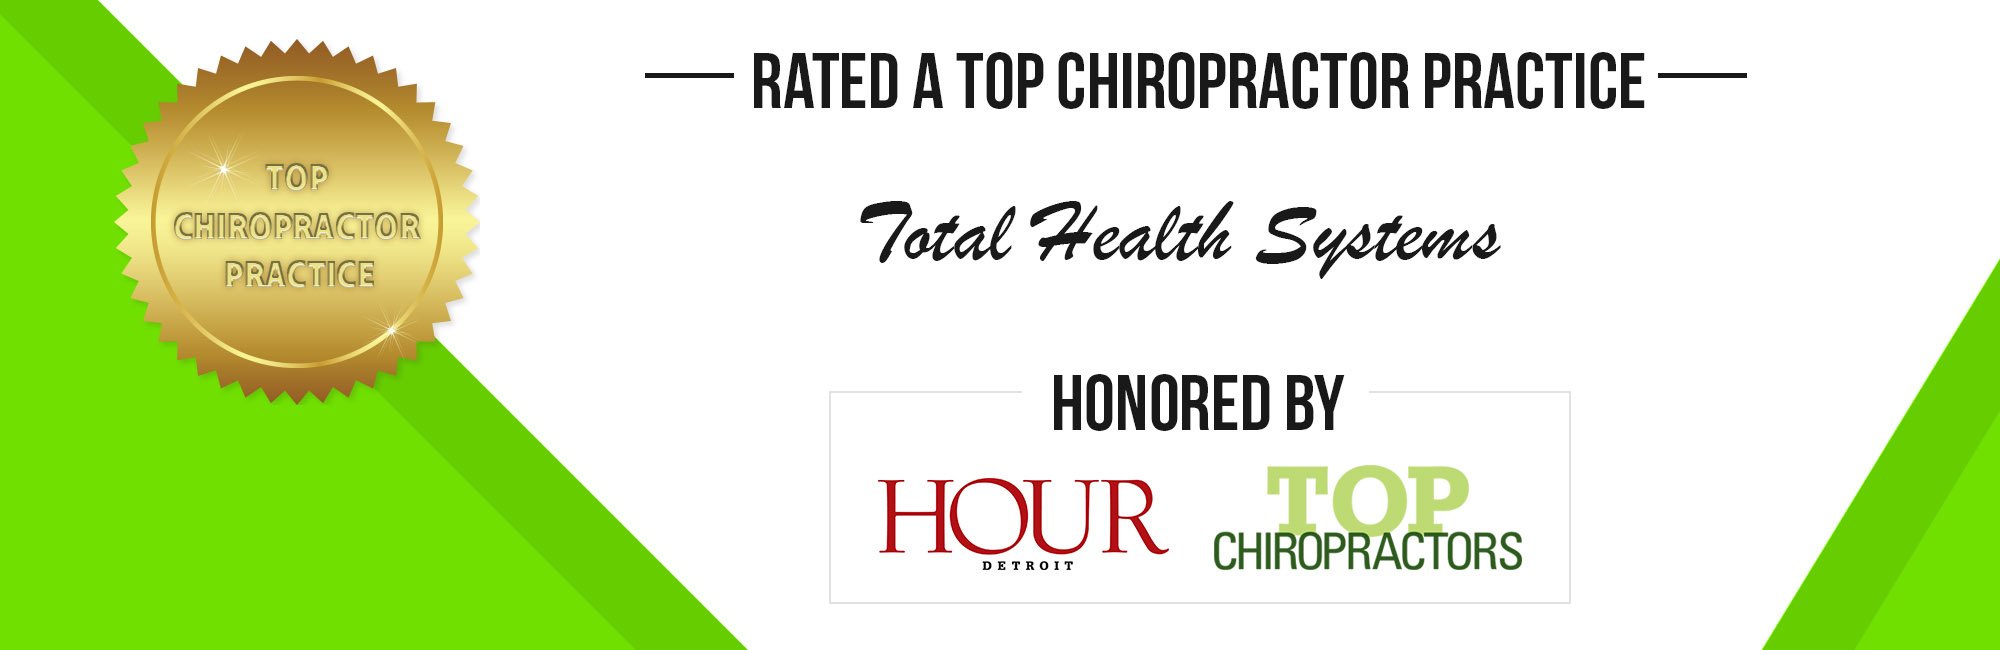 Top Chiropractor Total Health Systems